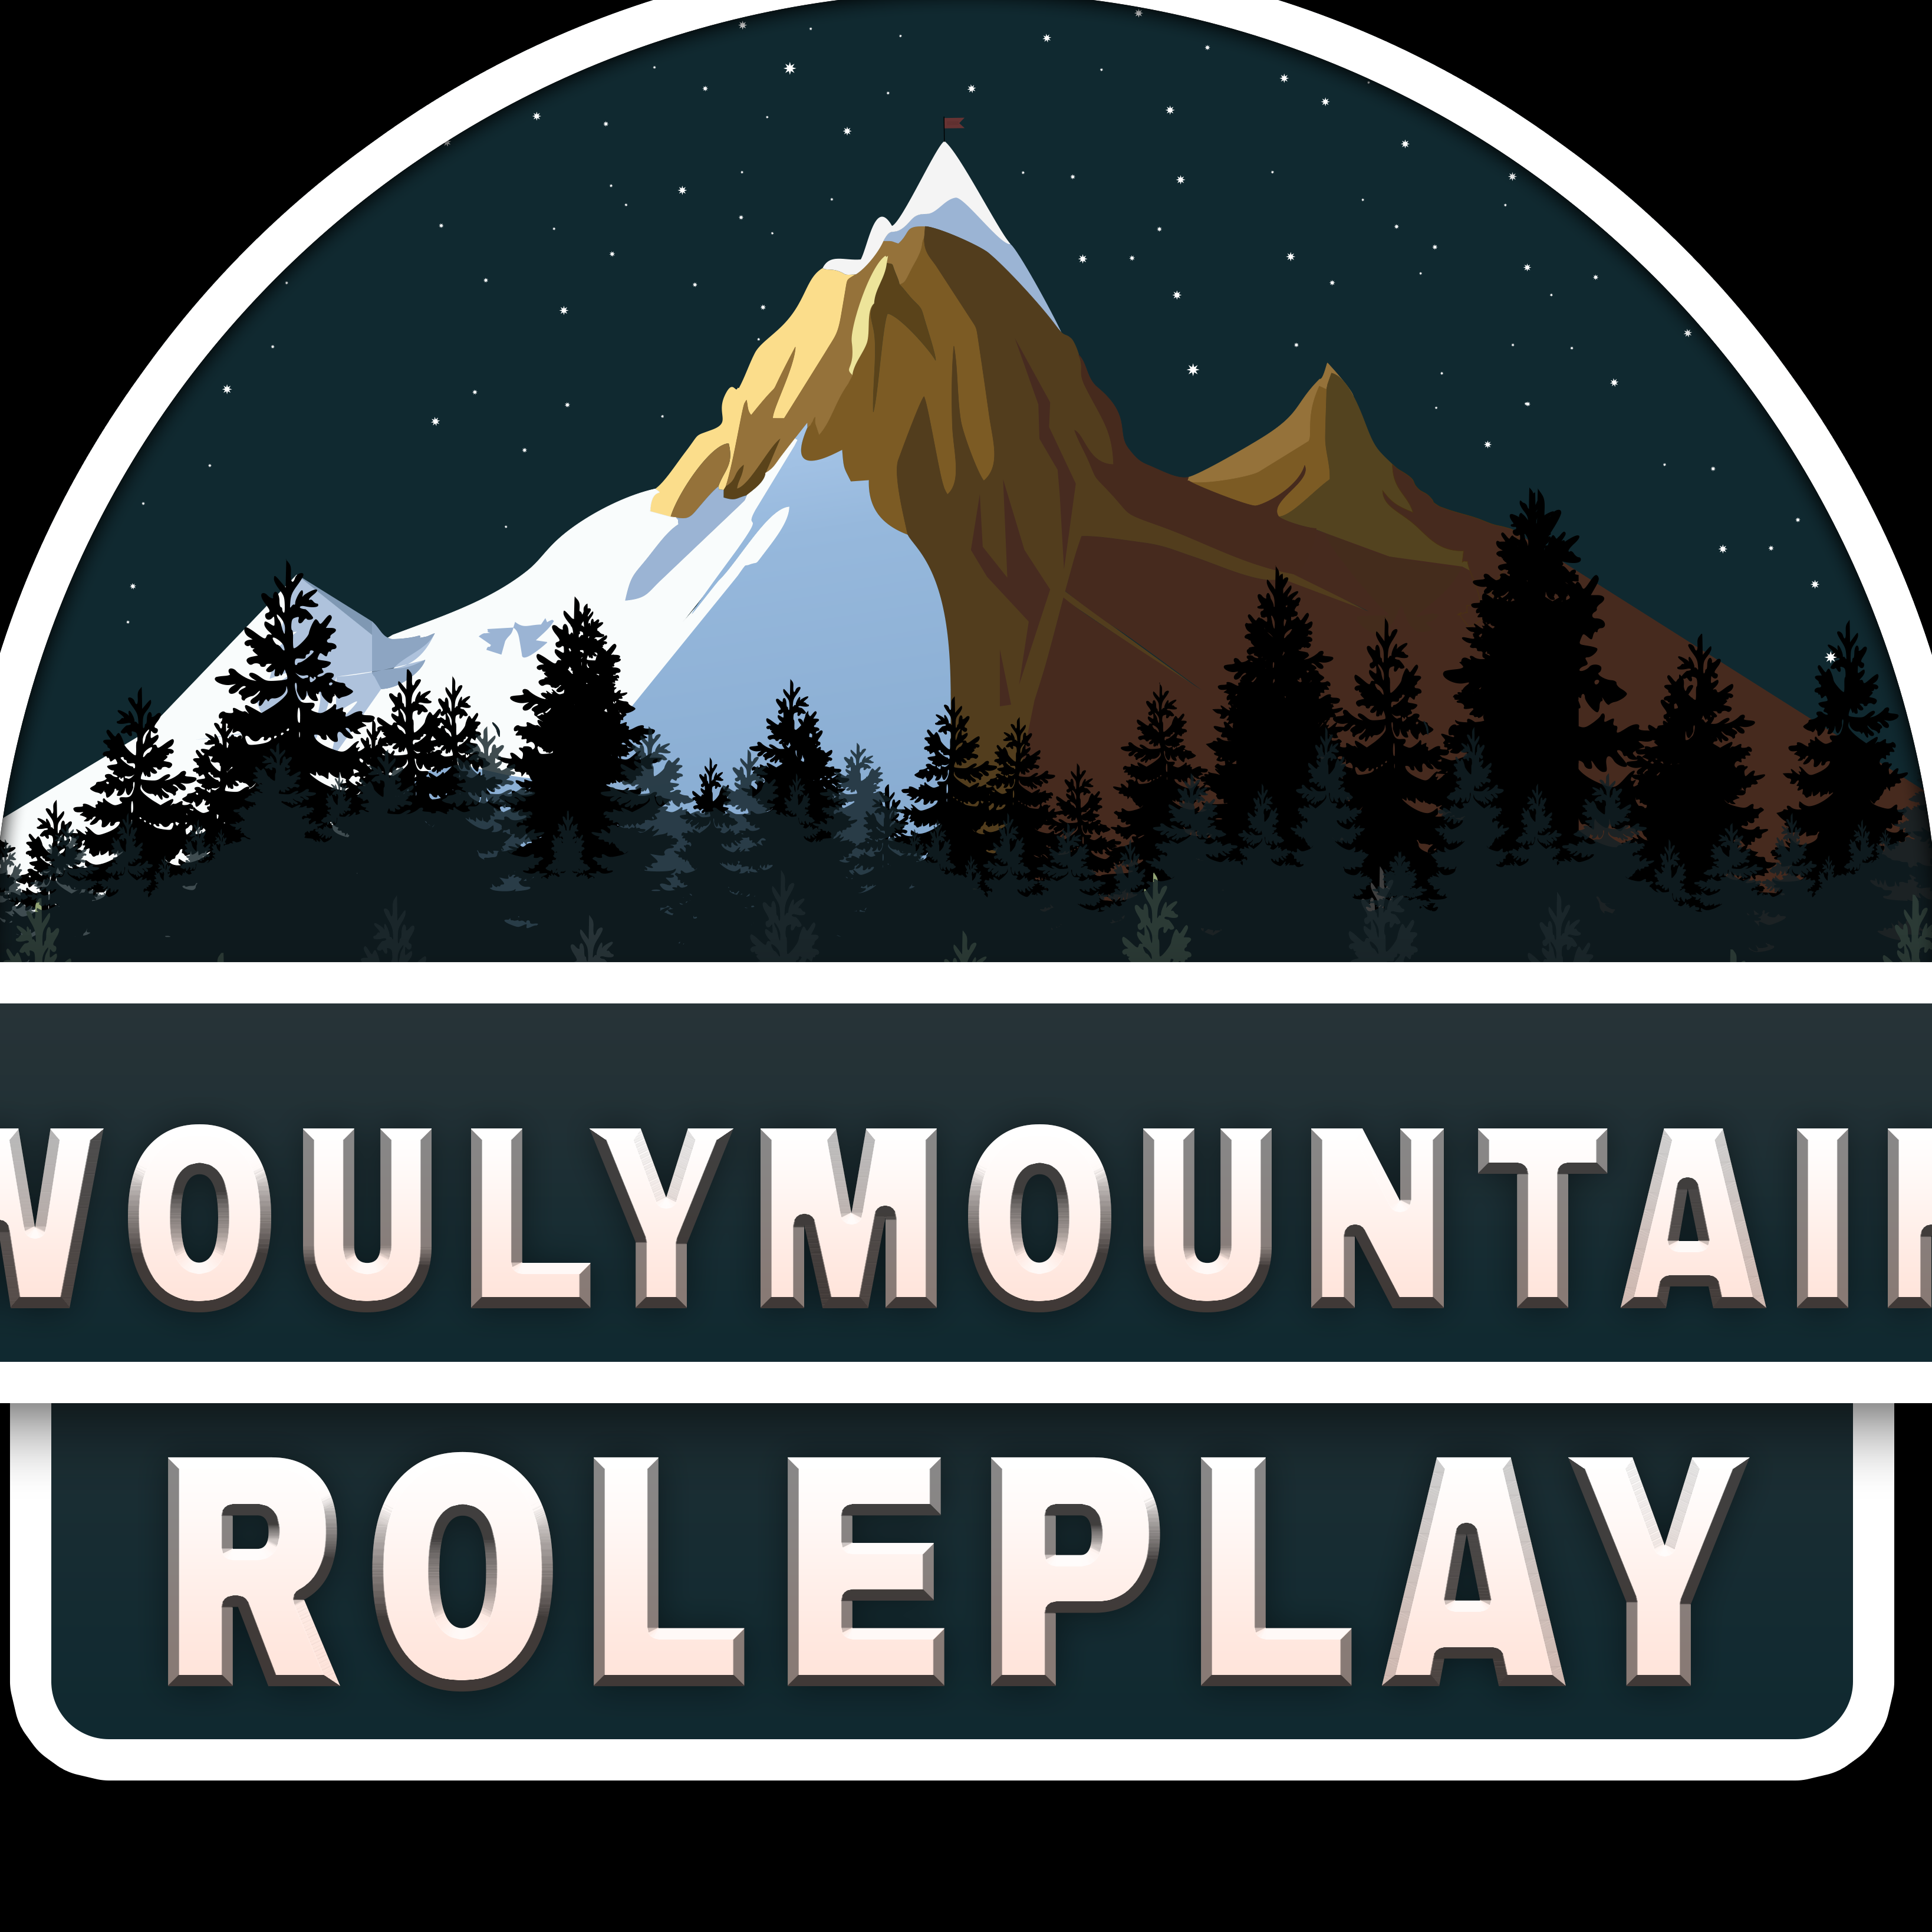 Woulymountain State Roleplay